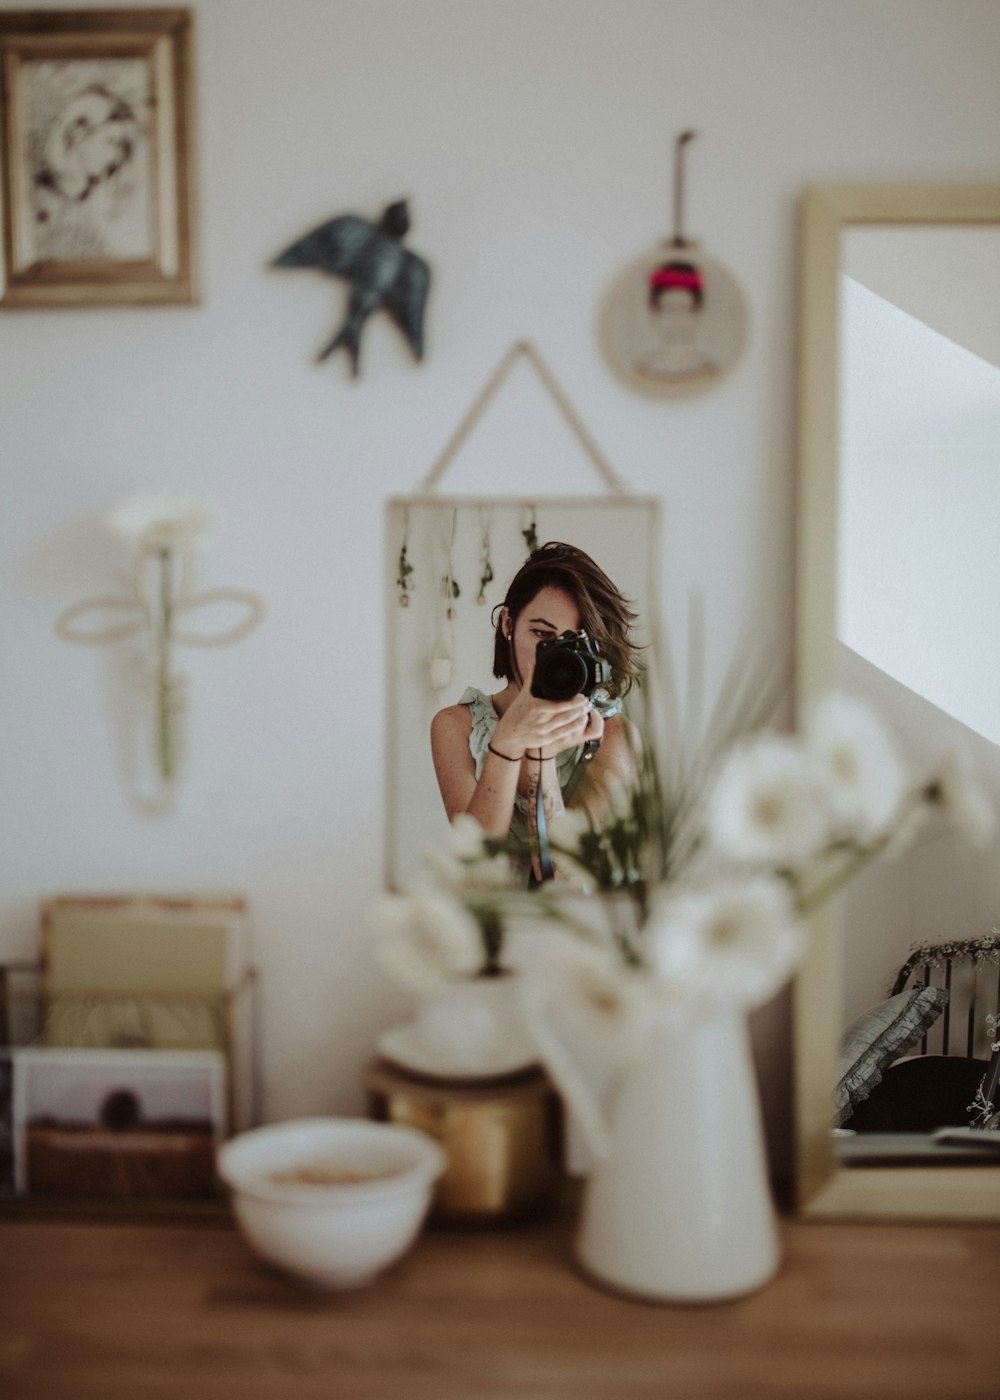 woman holding DSLR camera taking photo in front mirror inside room